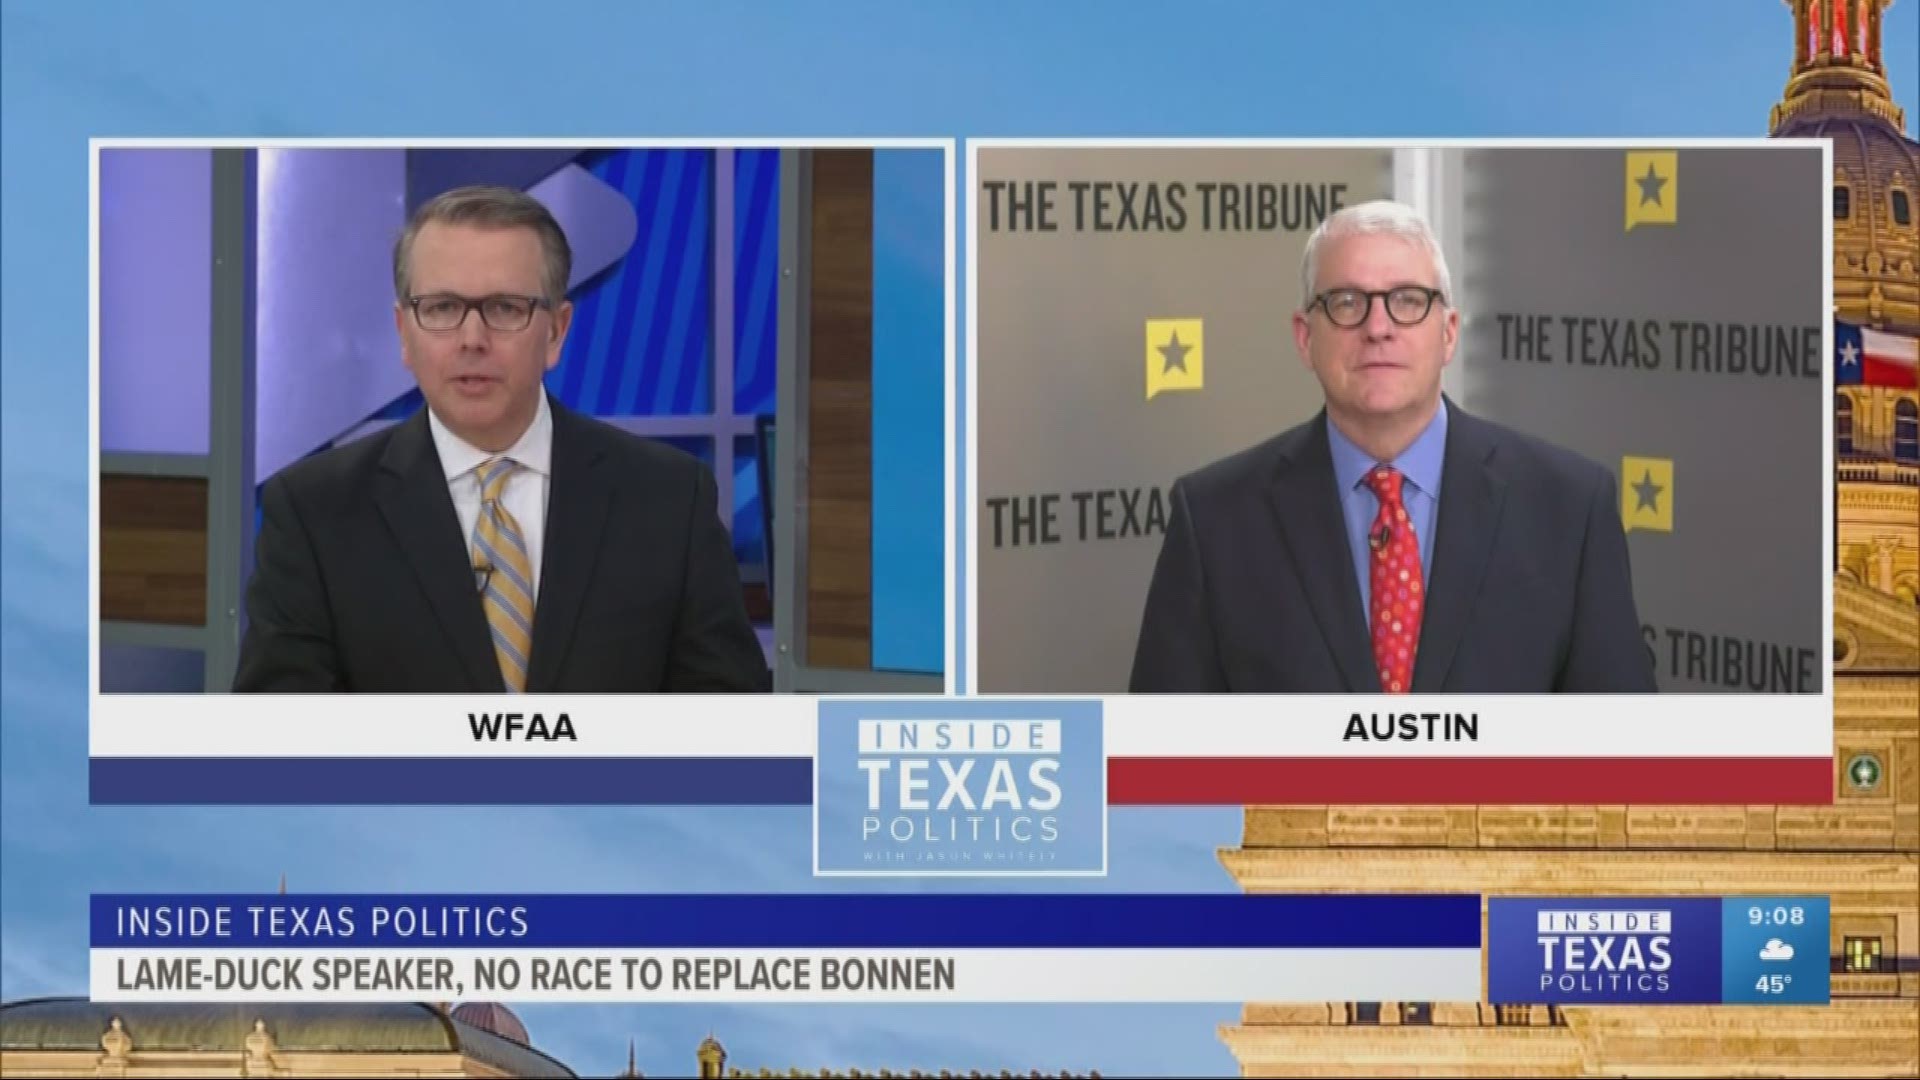 Ross Ramsey, the co-founder and executive editor of the Texas Tribune, joined host Jason Whitely to discuss whether there are any Republicans gunning for the job.